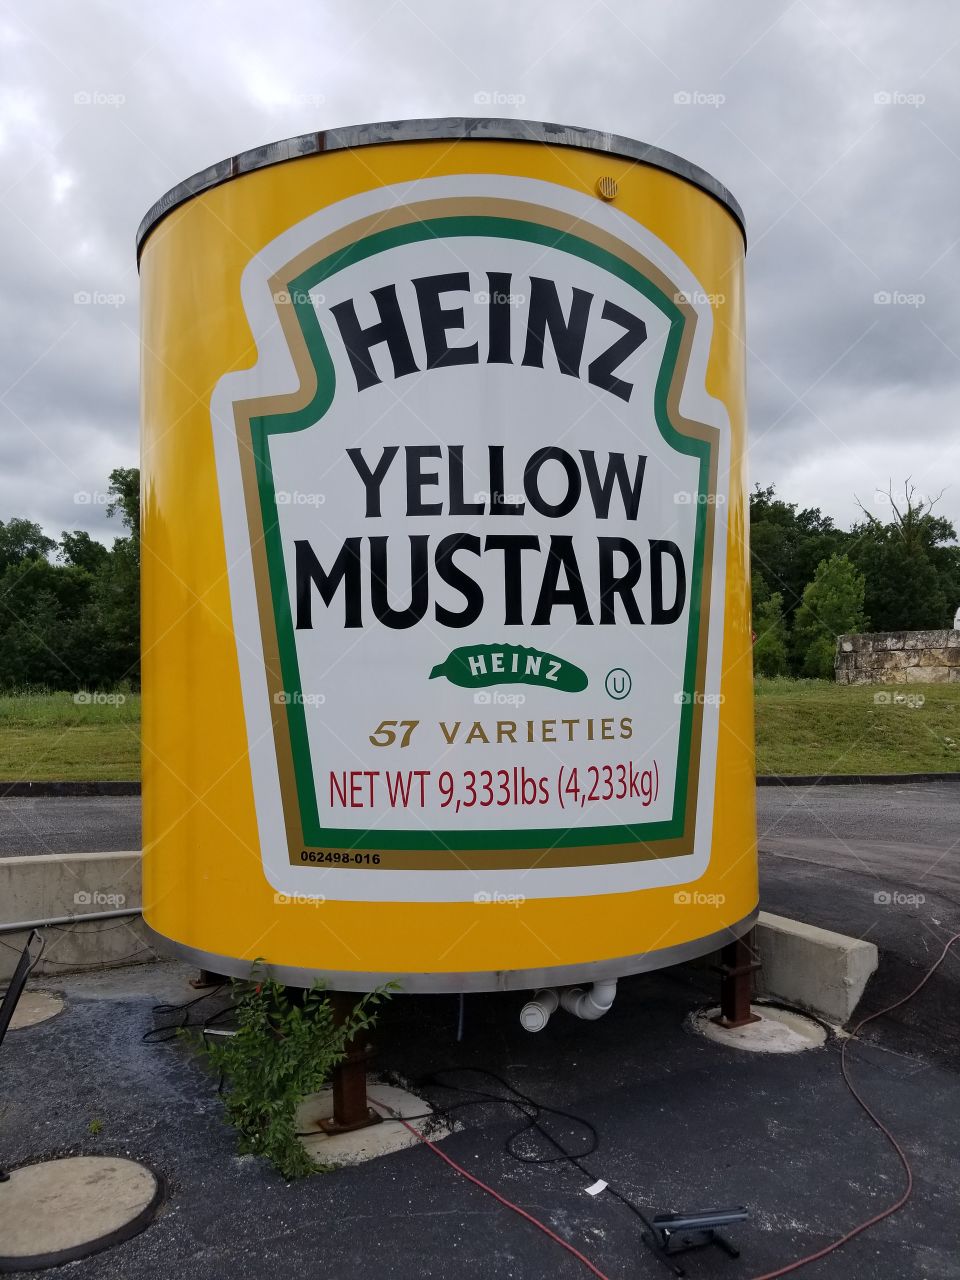 for the people who love that Heinz Mustard.